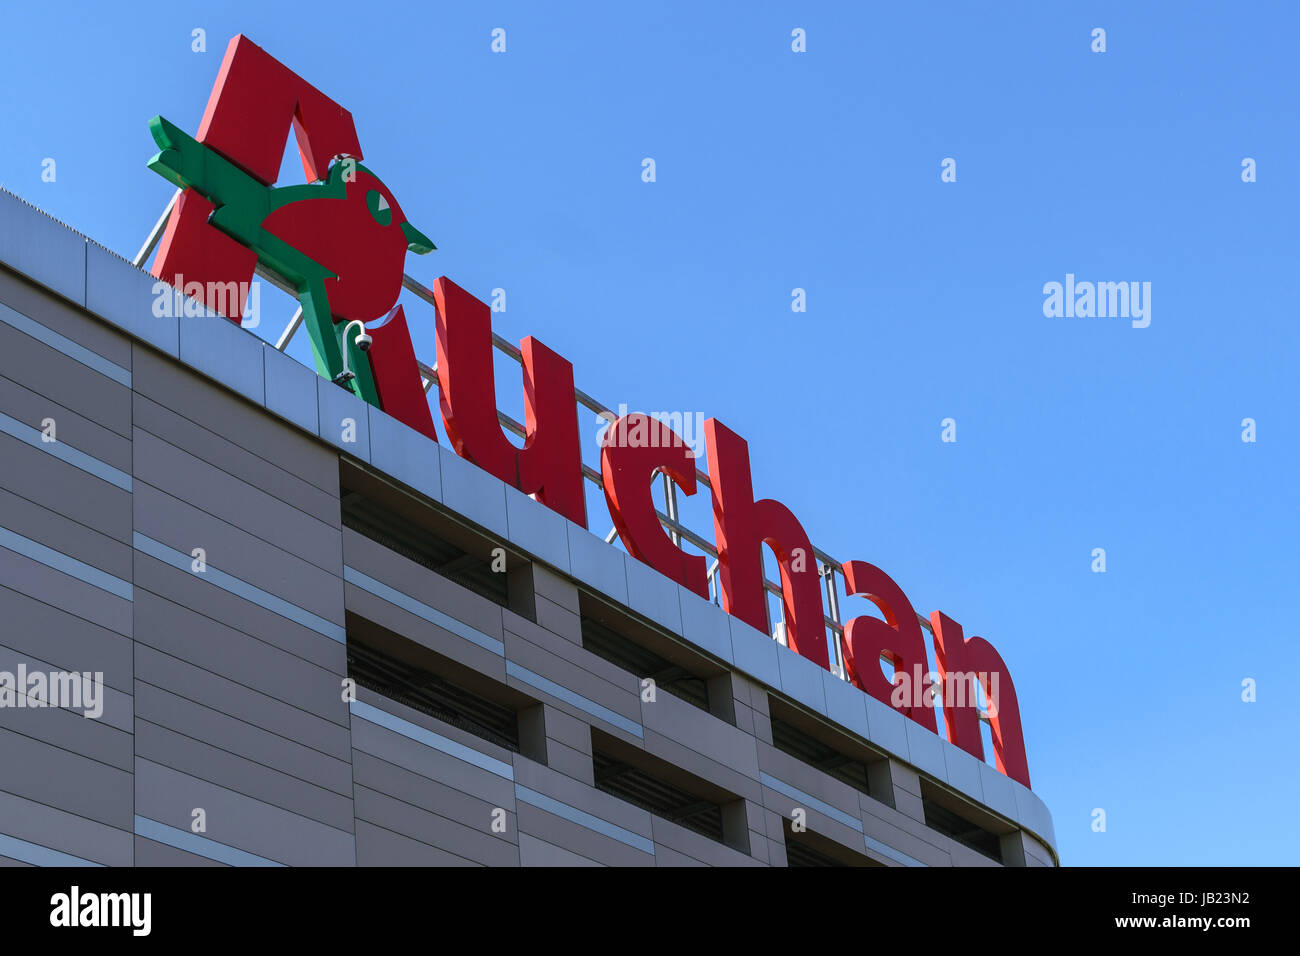 Krakow, Poland - 03 June 2017: Sign of the Auchan hypermarket on the blue sky in a sunny day. Auchan is a French international distribution hypermarke Stock Photo